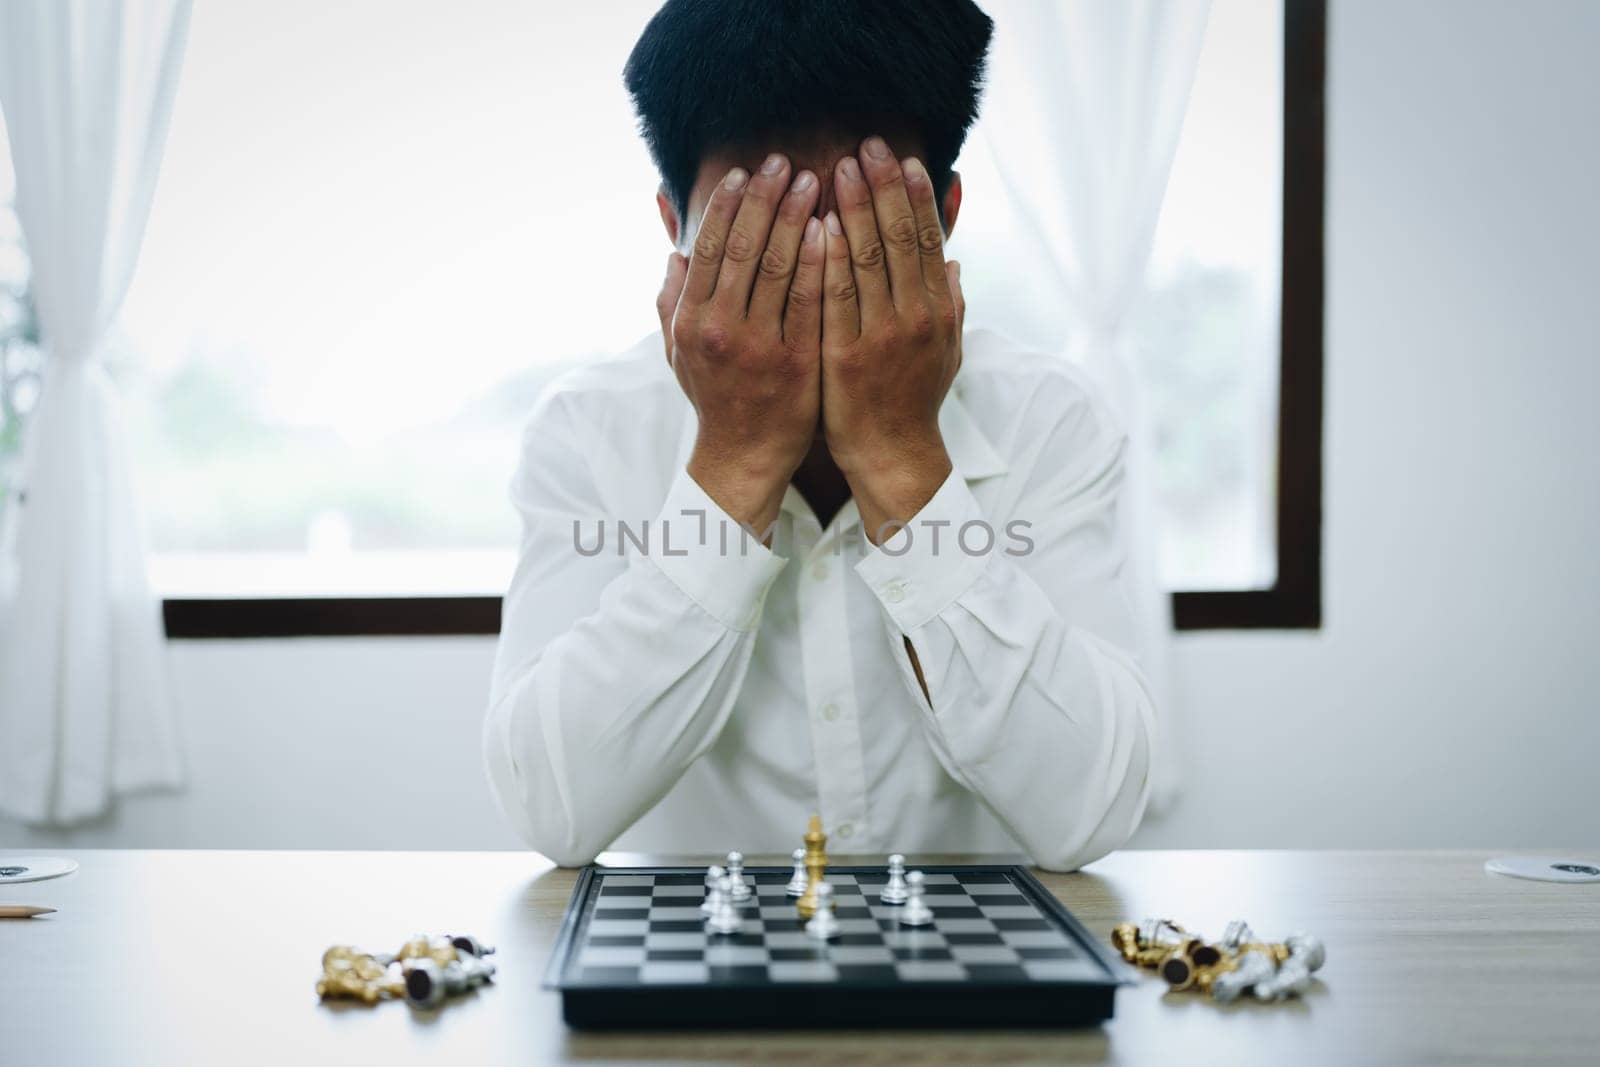 Playing and planning a chess walk, entrepreneurs show defeat in planning their financial affairs.